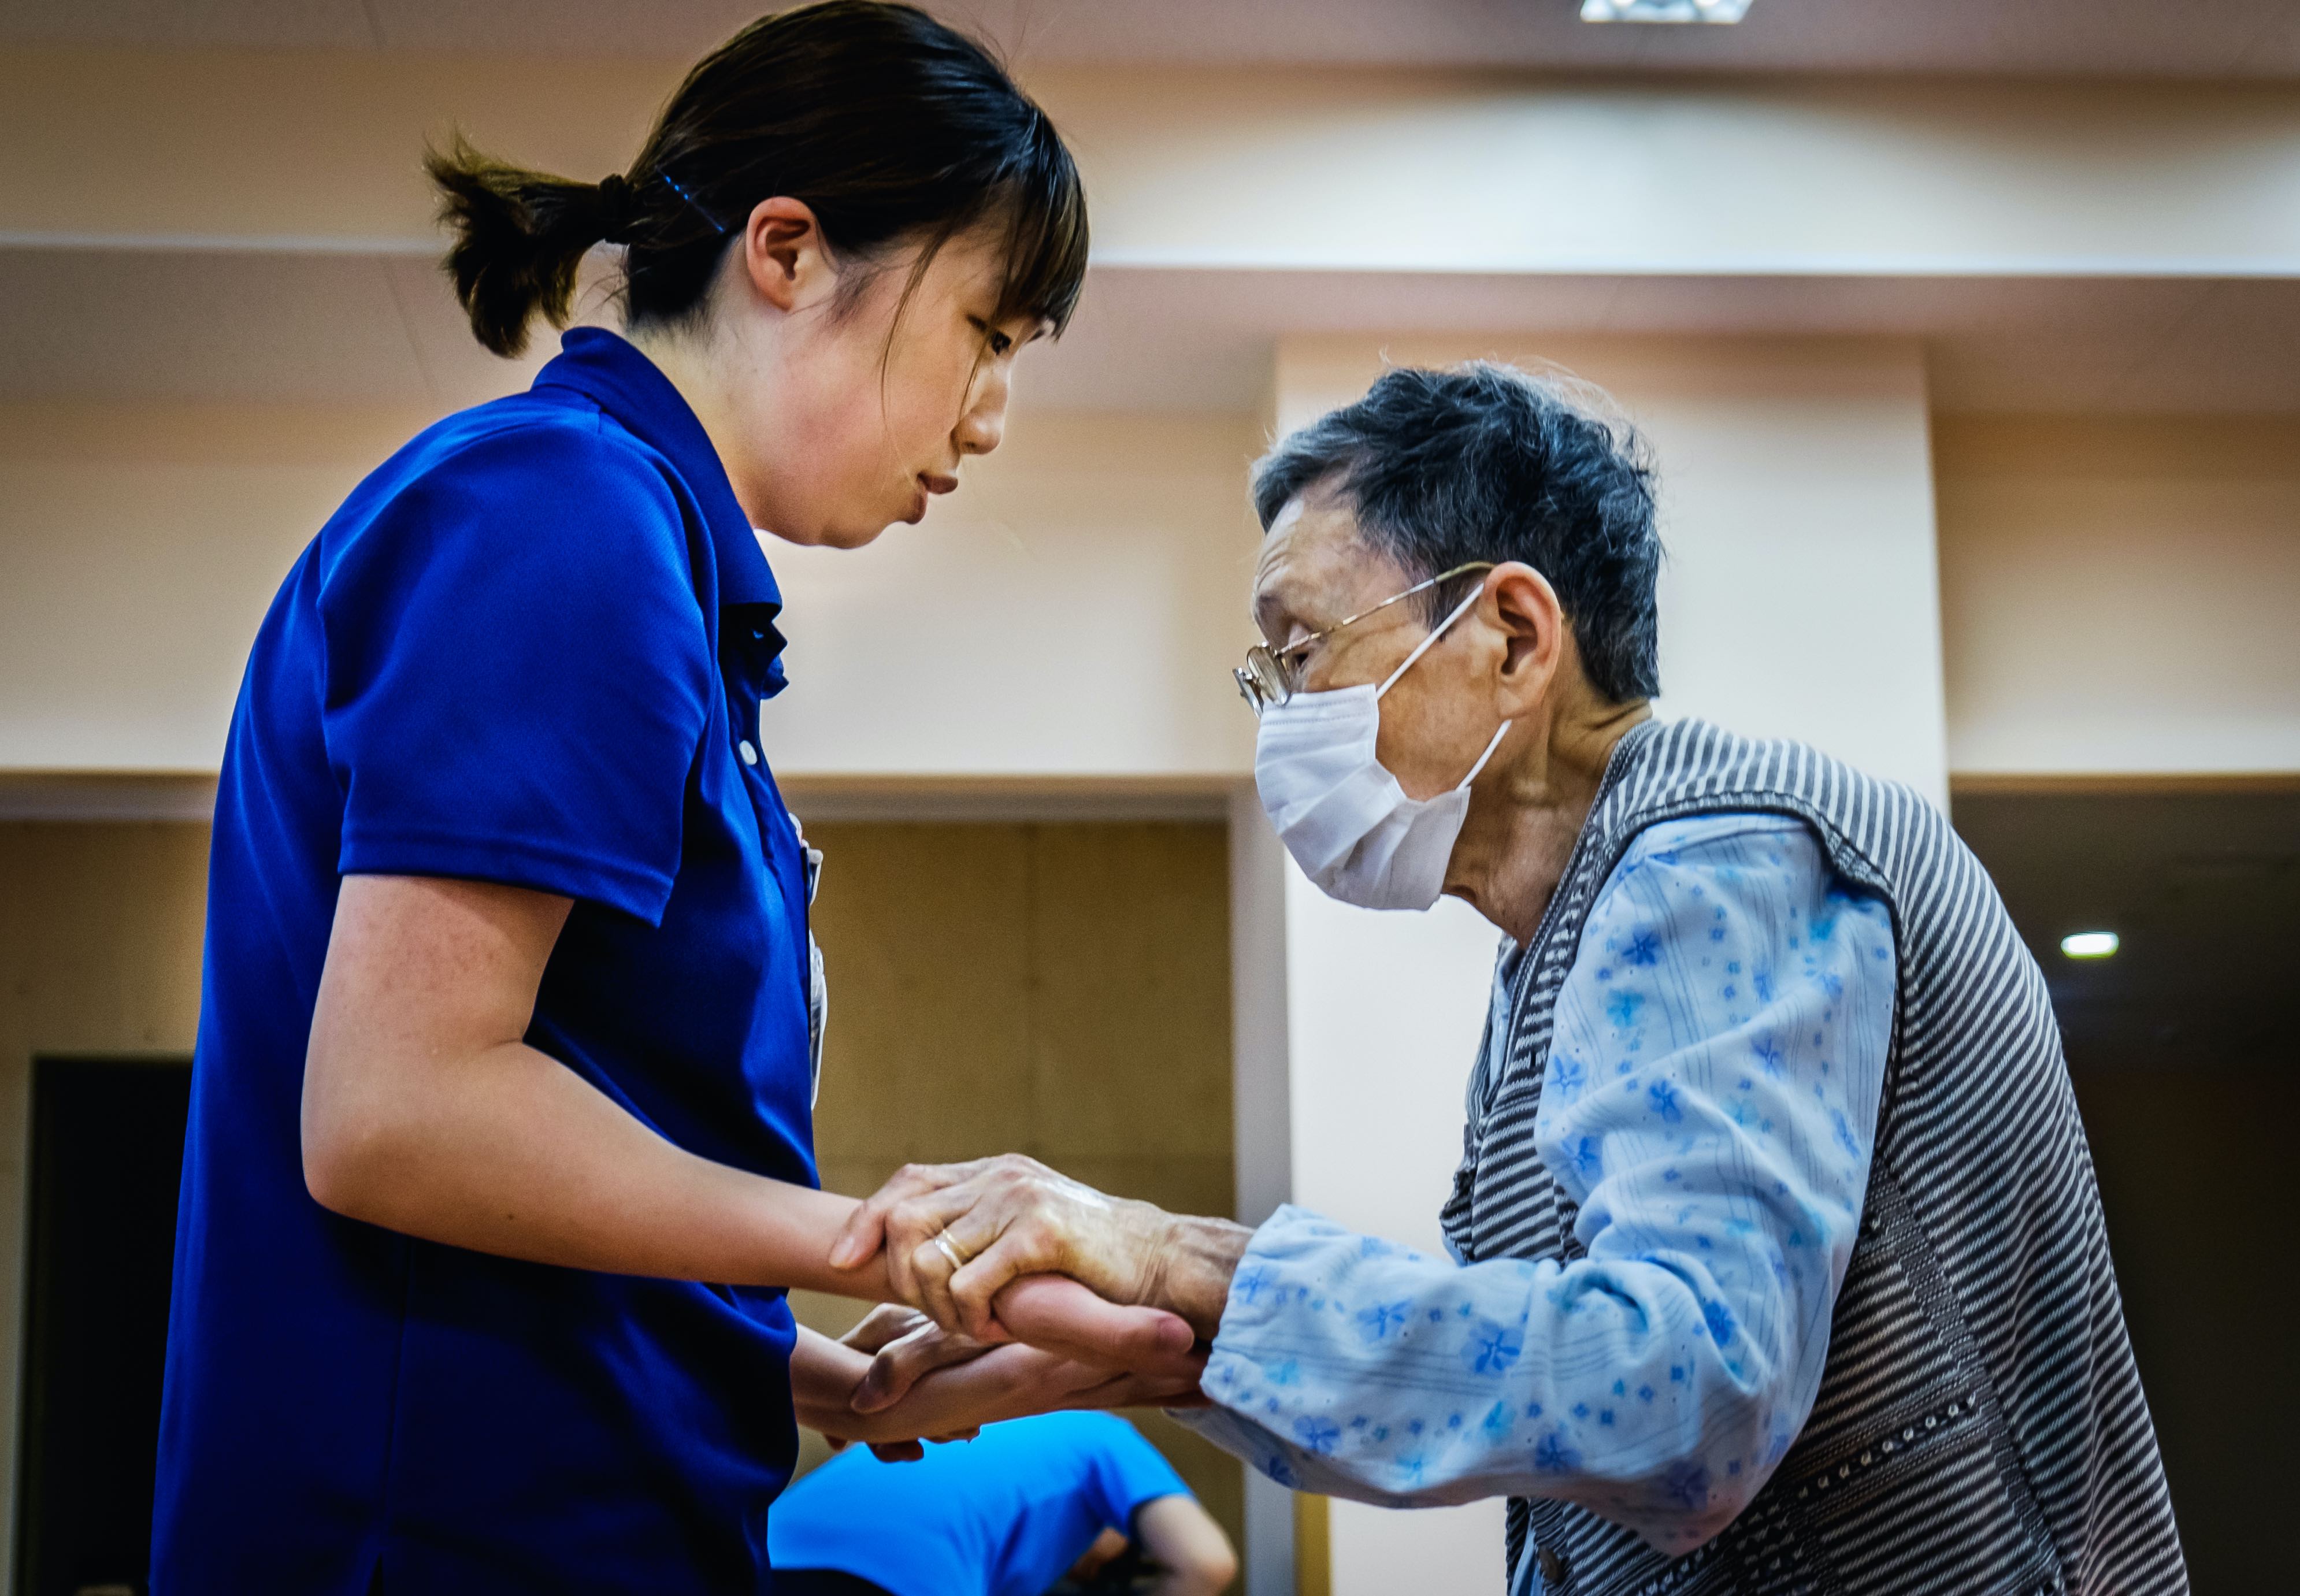 Preventing and managing COVID-19 across long-term care services: Policy brief, 24 July 2020